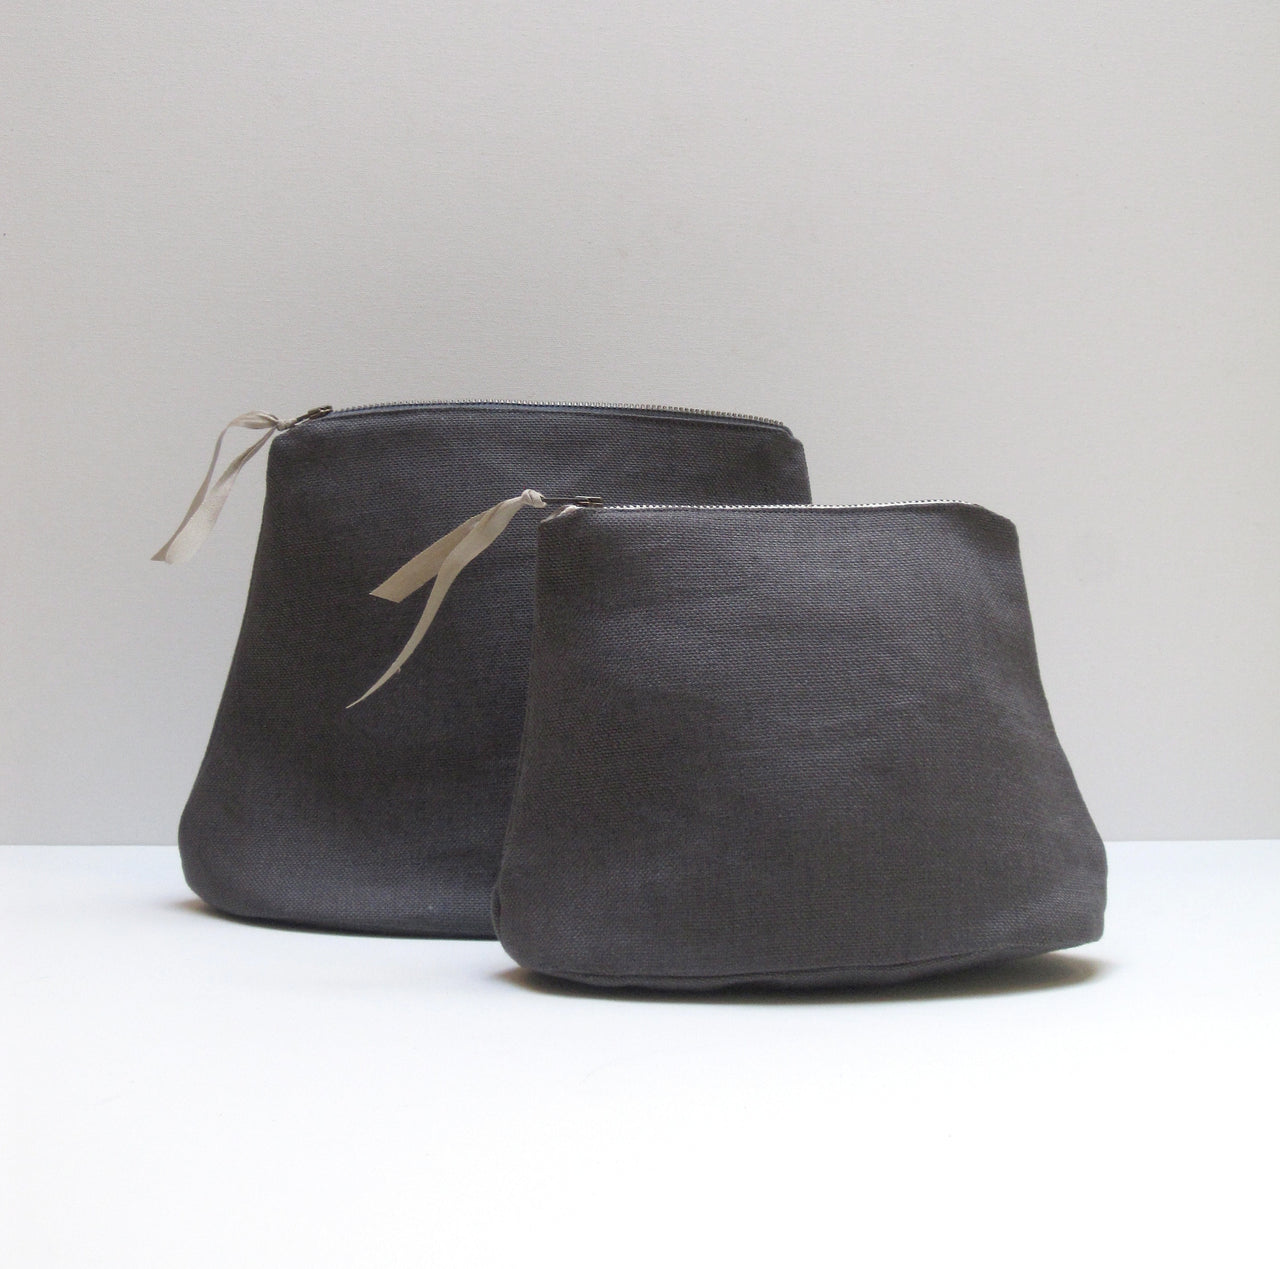 oval bottomed case - charcoal linen